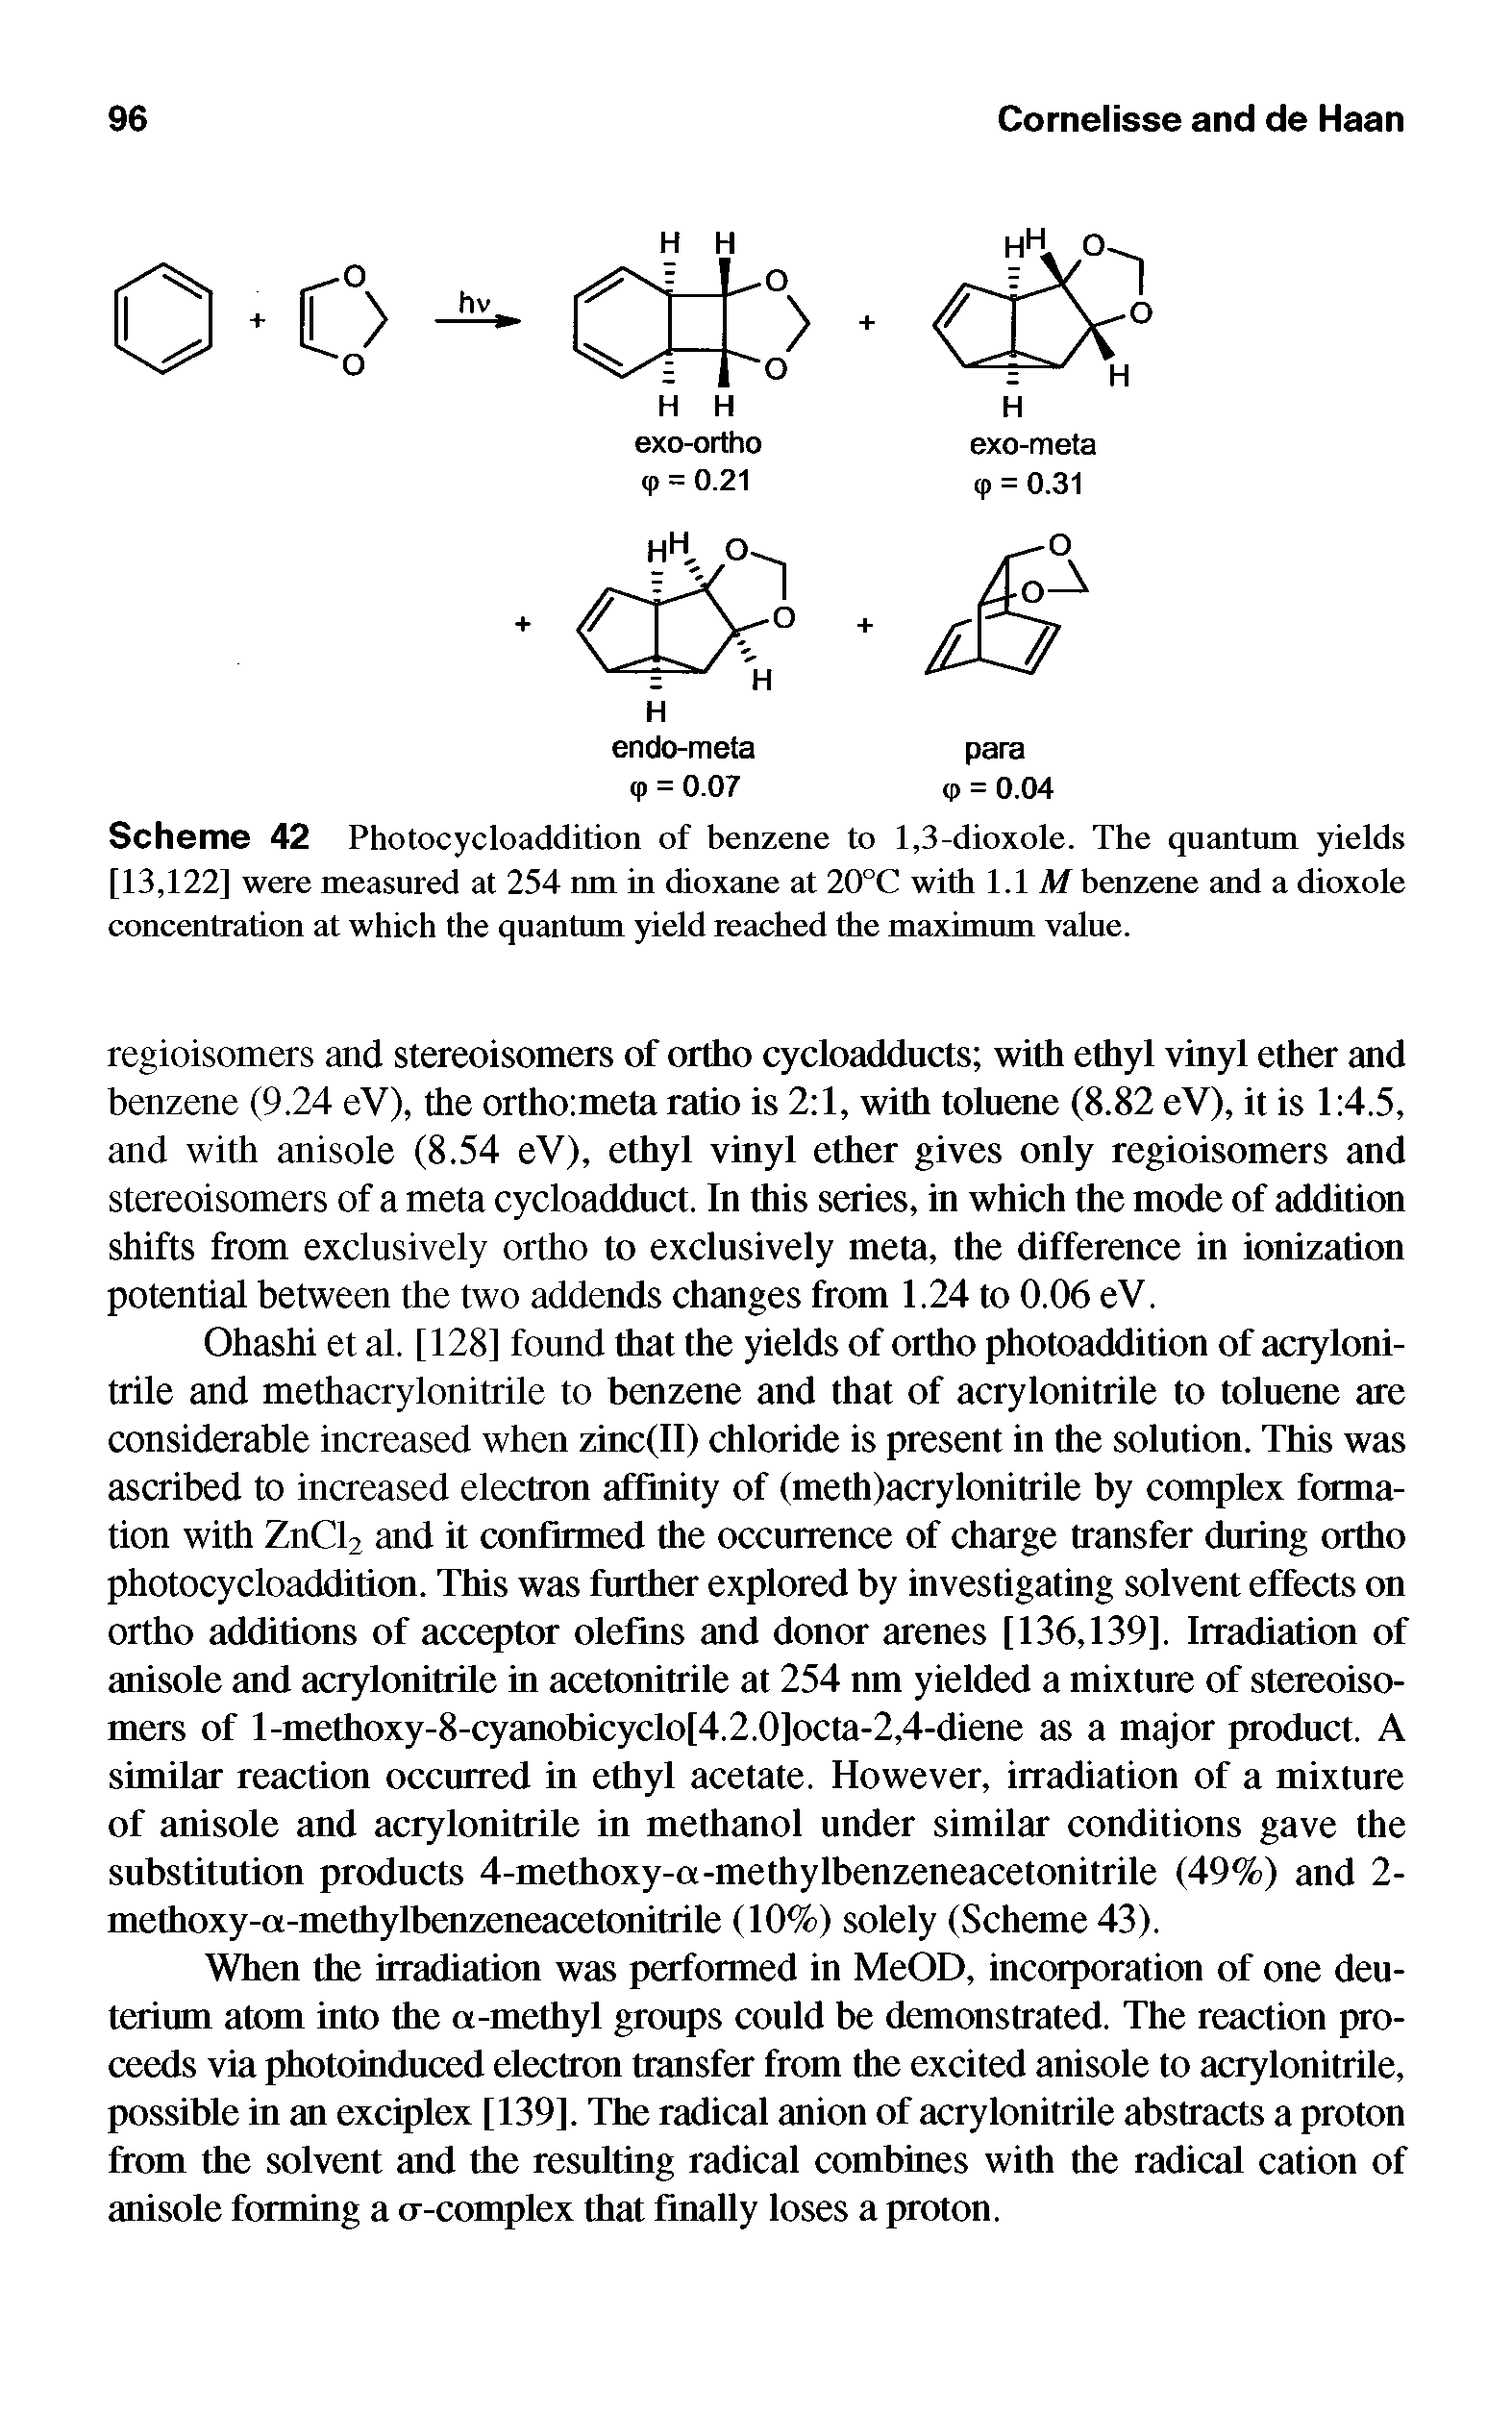 Scheme 42 Photocycloaddition of benzene to 1,3-dioxole. The quantum yields [13,122] were measured at 254 nm in dioxane at 20°C with 1.1 M benzene and a dioxole concentration at which the quantum yield reached the maximum value.